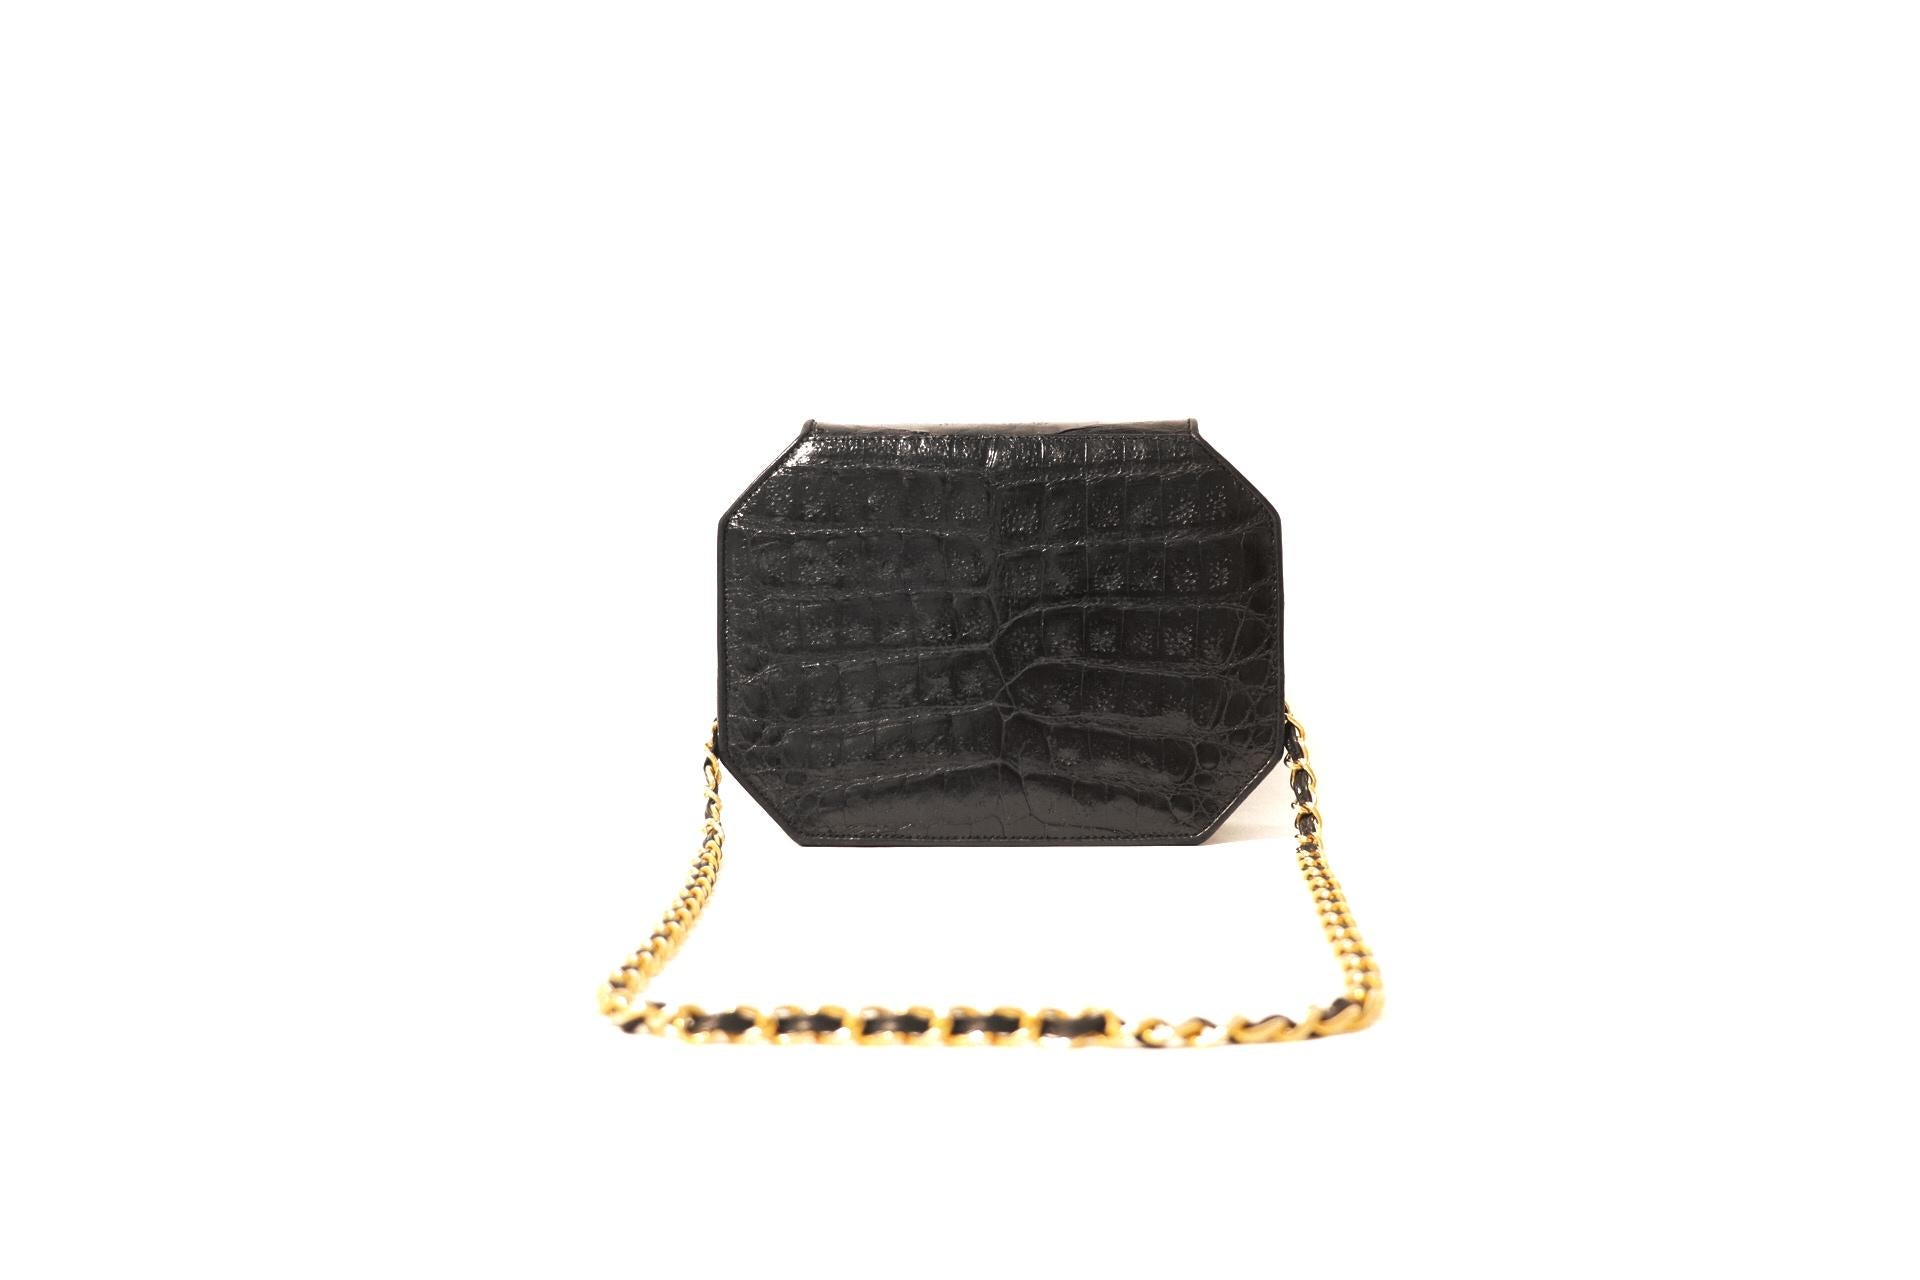 This authentic Chanel Black Crocodile Octagonal Bag is in excellent condition.  A rare vintage style, it is a beautiful addition to any collection. 
Sleek black crocodile skin is structured in an eight-sided shape.  Gold interlocking CC twist lock